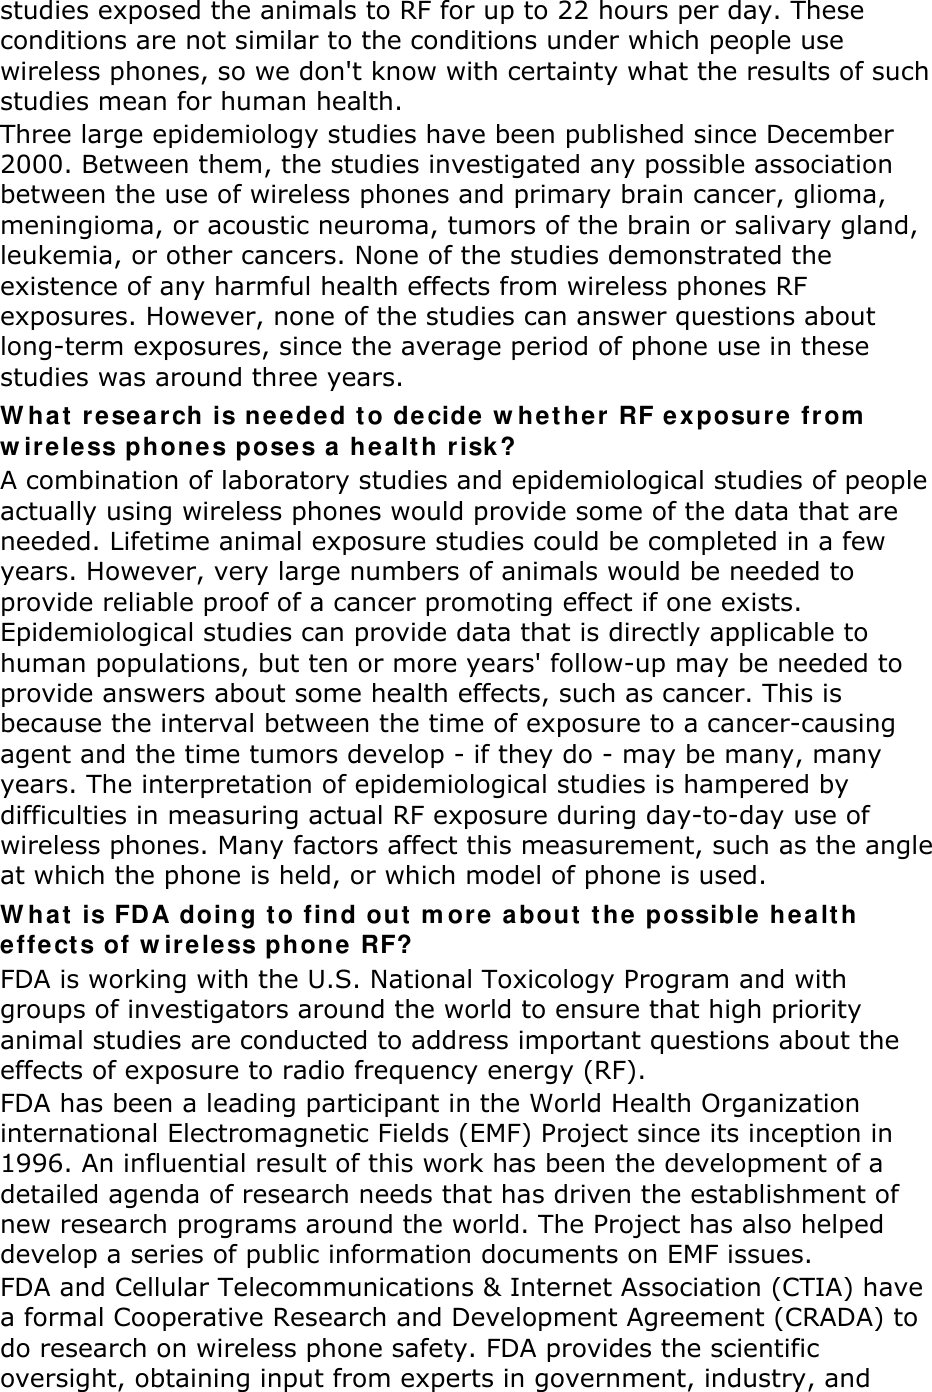 studies exposed the animals to RF for up to 22 hours per day. These conditions are not similar to the conditions under which people use wireless phones, so we don&apos;t know with certainty what the results of such studies mean for human health. Three large epidemiology studies have been published since December 2000. Between them, the studies investigated any possible association between the use of wireless phones and primary brain cancer, glioma, meningioma, or acoustic neuroma, tumors of the brain or salivary gland, leukemia, or other cancers. None of the studies demonstrated the existence of any harmful health effects from wireless phones RF exposures. However, none of the studies can answer questions about long-term exposures, since the average period of phone use in these studies was around three years. What research is needed to decide whether RF exposure from wireless phones poses a health risk? A combination of laboratory studies and epidemiological studies of people actually using wireless phones would provide some of the data that are needed. Lifetime animal exposure studies could be completed in a few years. However, very large numbers of animals would be needed to provide reliable proof of a cancer promoting effect if one exists. Epidemiological studies can provide data that is directly applicable to human populations, but ten or more years&apos; follow-up may be needed to provide answers about some health effects, such as cancer. This is because the interval between the time of exposure to a cancer-causing agent and the time tumors develop - if they do - may be many, many years. The interpretation of epidemiological studies is hampered by difficulties in measuring actual RF exposure during day-to-day use of wireless phones. Many factors affect this measurement, such as the angle at which the phone is held, or which model of phone is used. What is FDA doing to find out more about the possible health effects of wireless phone RF? FDA is working with the U.S. National Toxicology Program and with groups of investigators around the world to ensure that high priority animal studies are conducted to address important questions about the effects of exposure to radio frequency energy (RF). FDA has been a leading participant in the World Health Organization international Electromagnetic Fields (EMF) Project since its inception in 1996. An influential result of this work has been the development of a detailed agenda of research needs that has driven the establishment of new research programs around the world. The Project has also helped develop a series of public information documents on EMF issues. FDA and Cellular Telecommunications &amp; Internet Association (CTIA) have a formal Cooperative Research and Development Agreement (CRADA) to do research on wireless phone safety. FDA provides the scientific oversight, obtaining input from experts in government, industry, and 